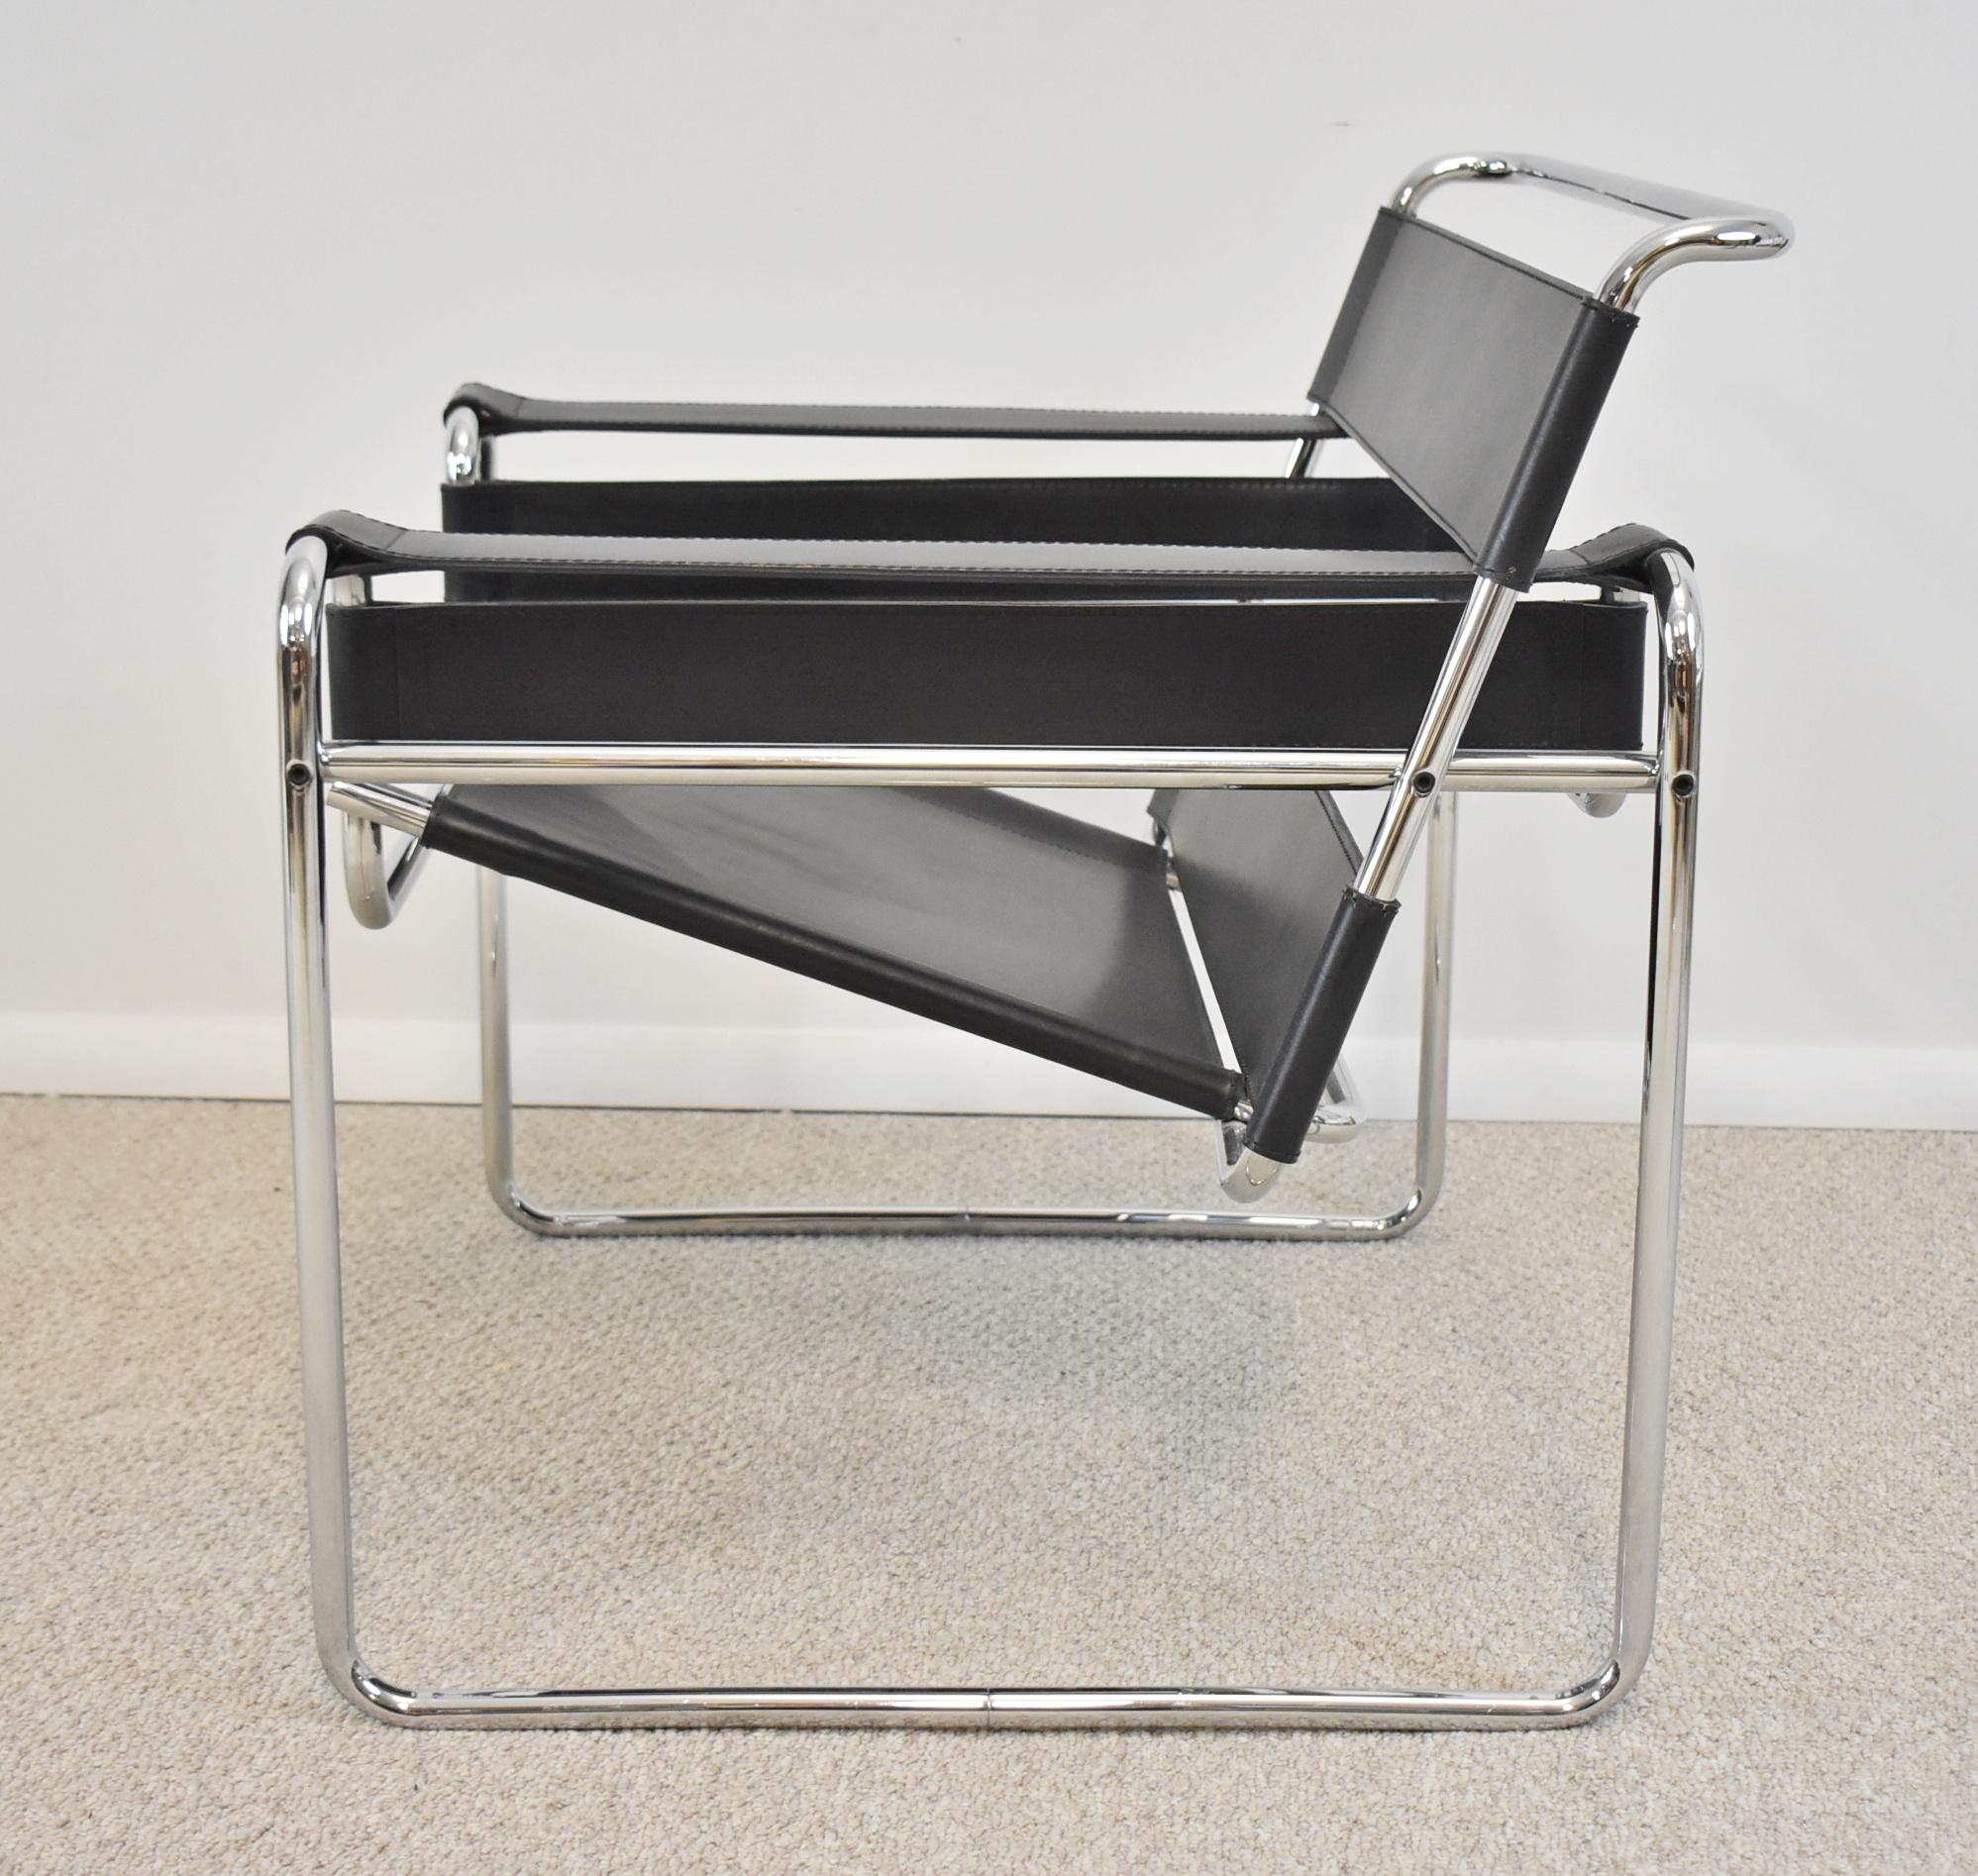 Wassily style chair by Marcel Breuer - Knoll Studio - Black leather/chrome sling armchair. The Wassily Chair, also known as the Model B3 chair, was designed by Marcel Breuer in 1925–1926 while he was the head of the cabinet-making workshop at the